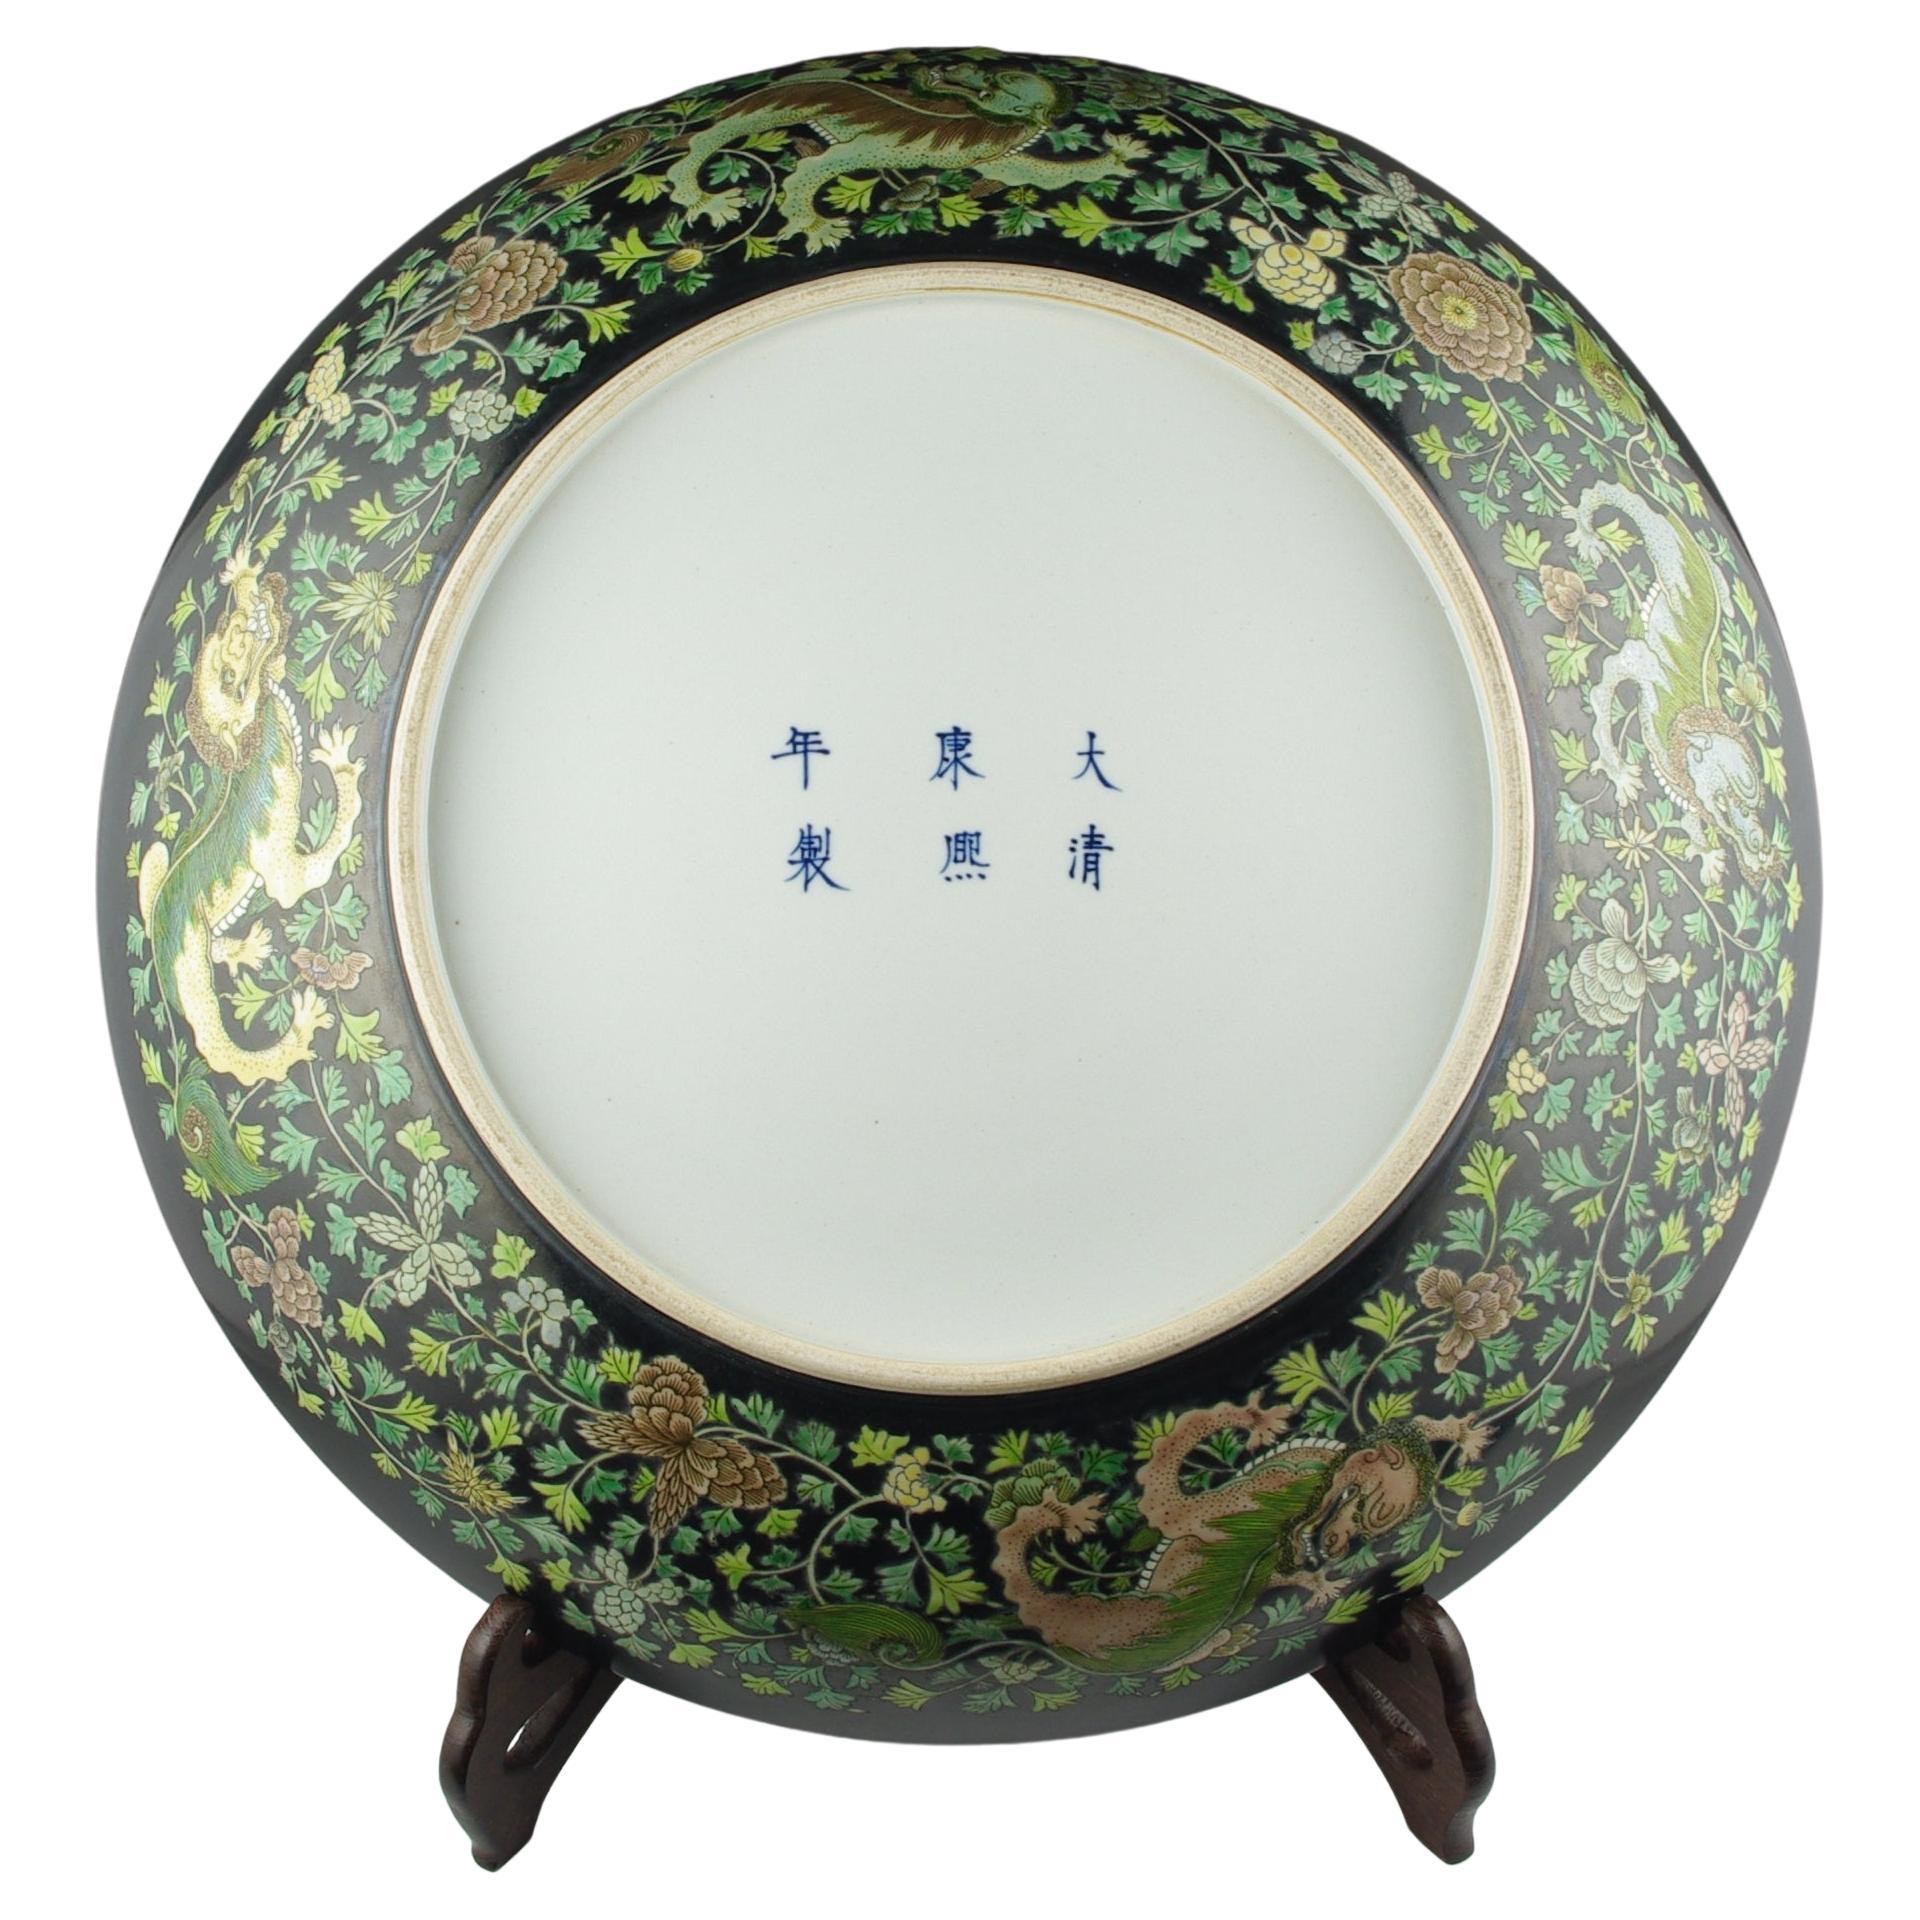 A massive Chinese famille noire porcelain charger, finely hand decorated in sancai with a center medallion and a band of foo-dogs in vines and foliage, very well executed to emulate early Qing Kangxi imperial works. This impressive charger measures